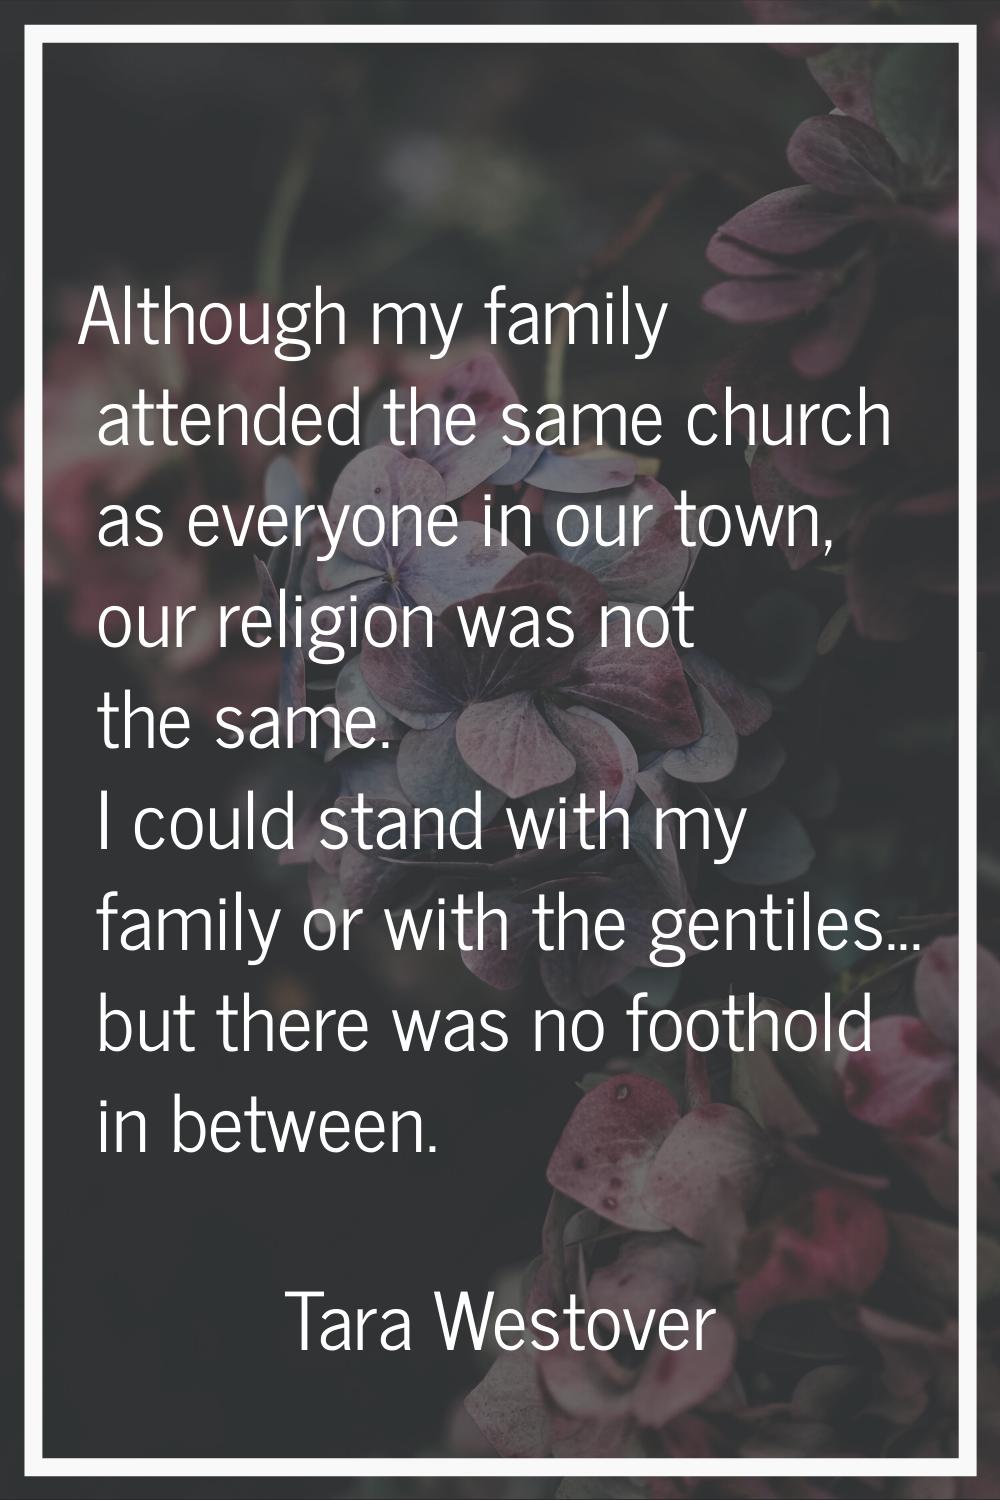 Although my family attended the same church as everyone in our town, our religion was not the same.